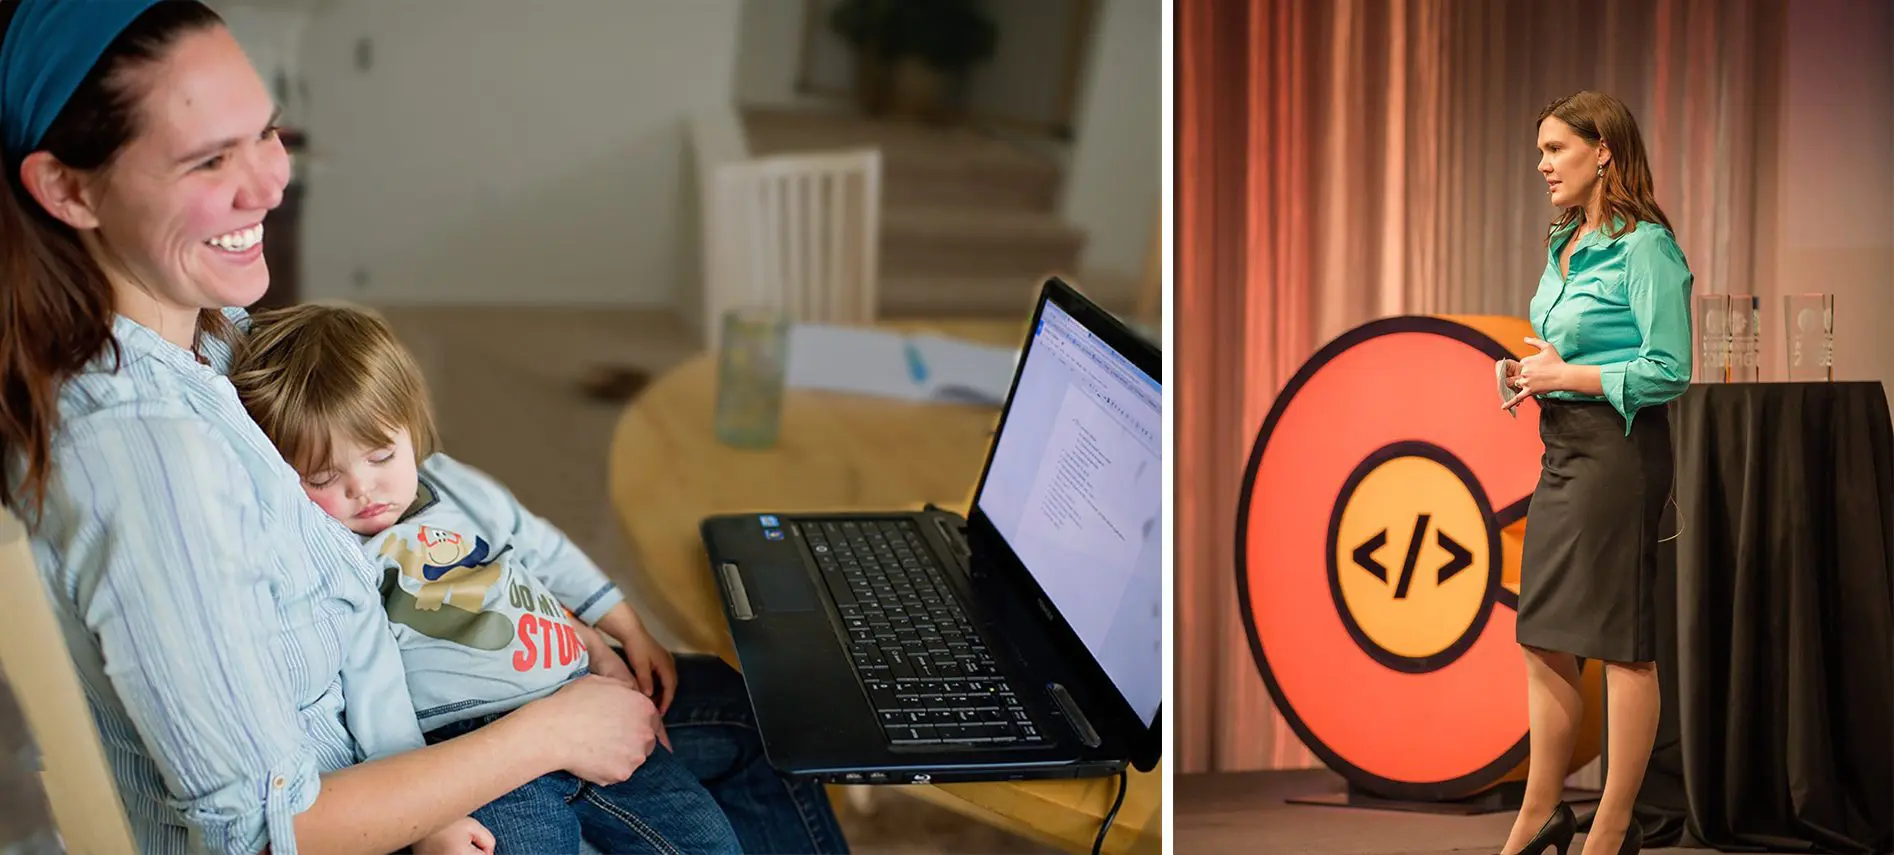 Amber holding a sleeping toddler while she works at a kitchen table on her laptop next to a different photo of her speaking on stage in professional attire.